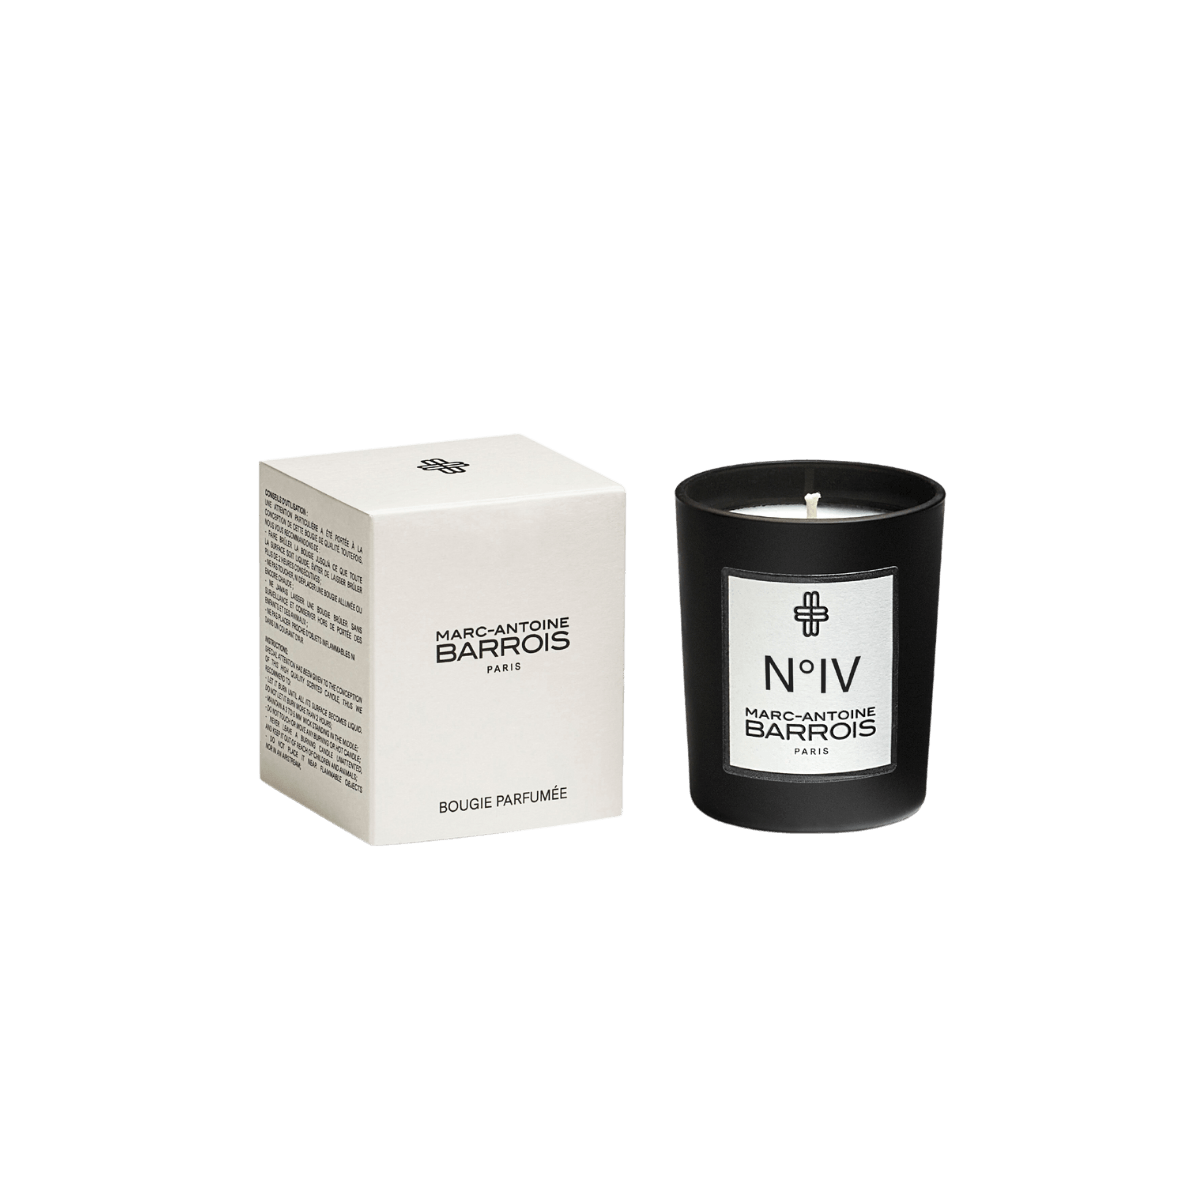 Image of No4 scented candle  by the perfume brand Marc-Antoine Barrois